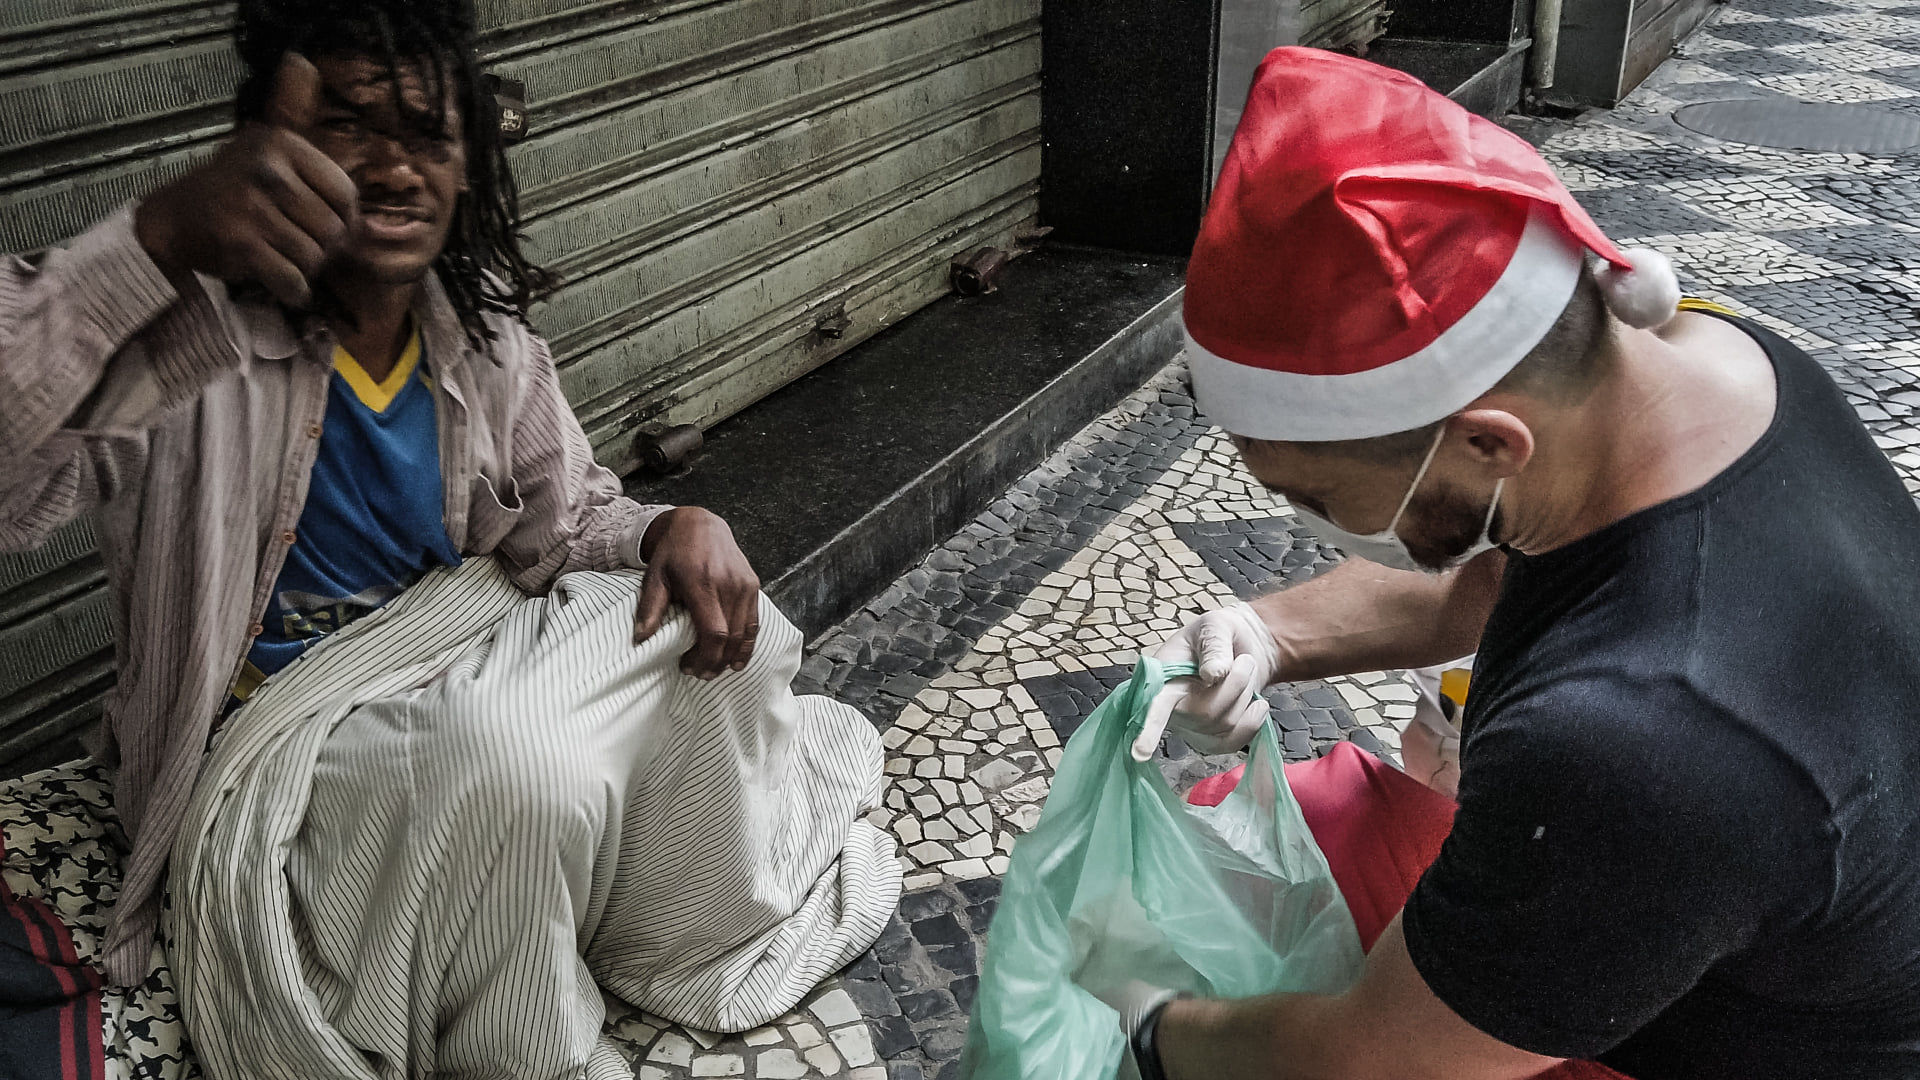 Miroslaw Wawak supporting the Homeless of Rio during COVID-19 pandemic | Christmas 2020